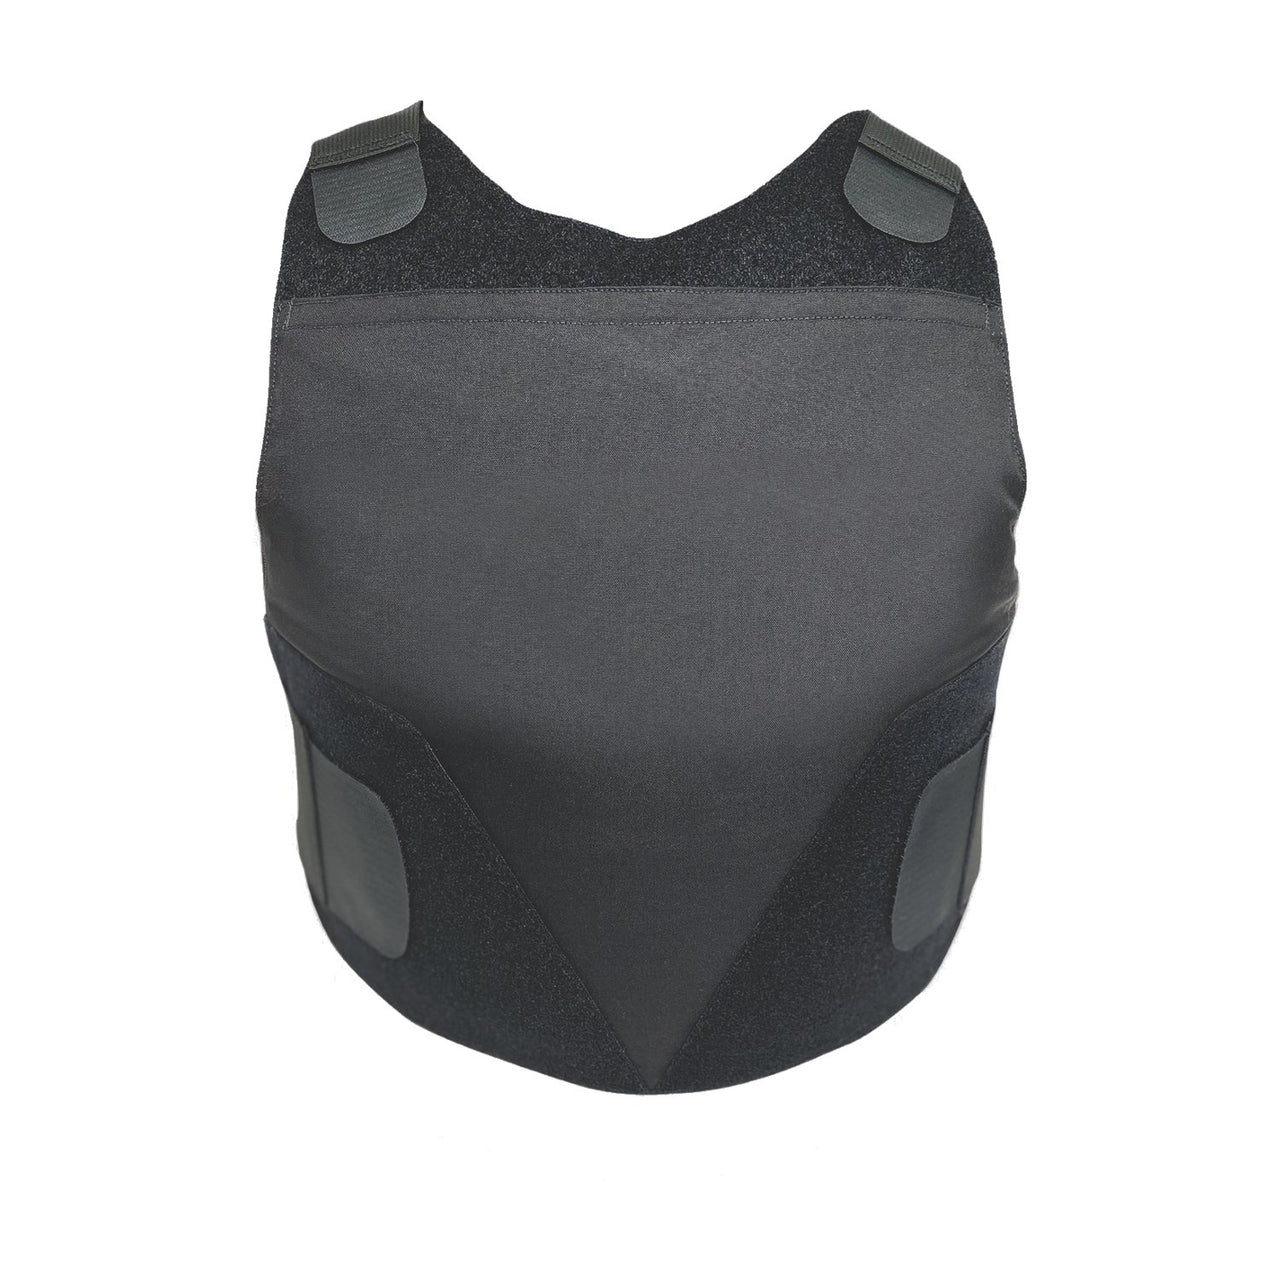 An image of the Body Armor Direct All American Concealable Carrier vest on a white background.